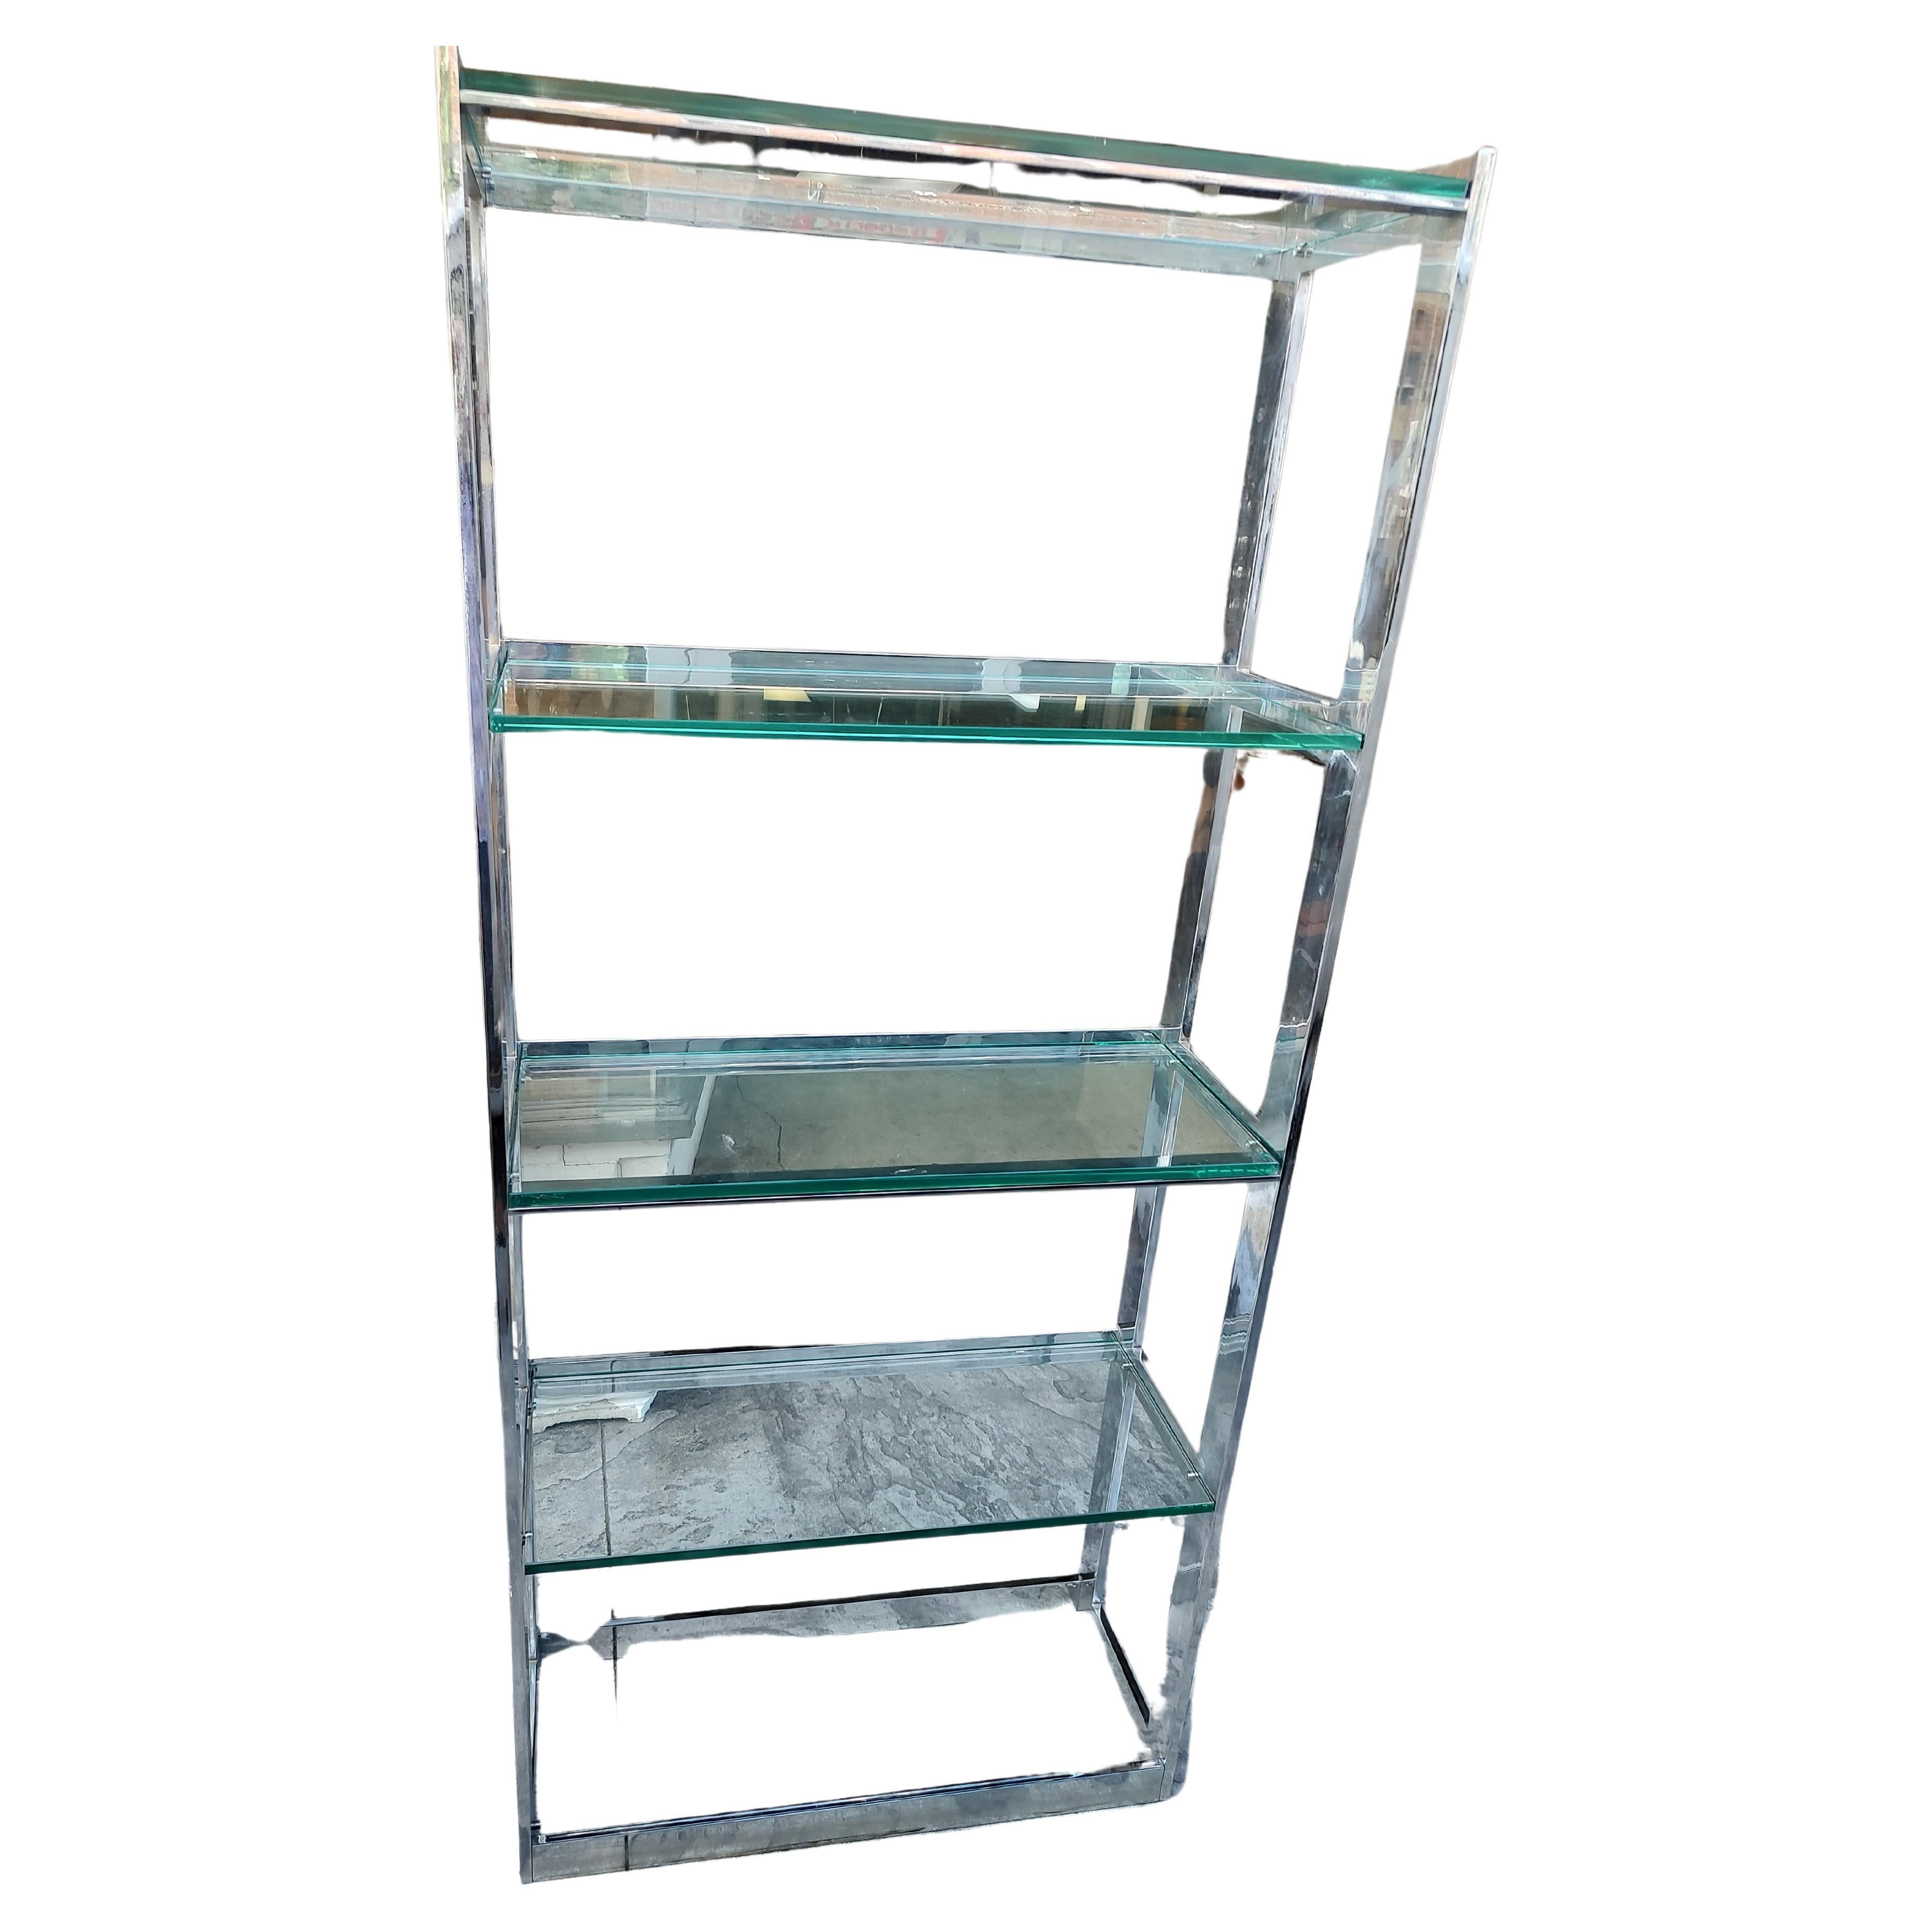 Pair of Mid-Century Modern flat bar chrome Etageres with 1/2 inch thick glass shelving. In excellent vintage condition with small chips to the glass corners. 5 glass shelves. Chrome will be polished at sale time. Quality piece. Very tight.